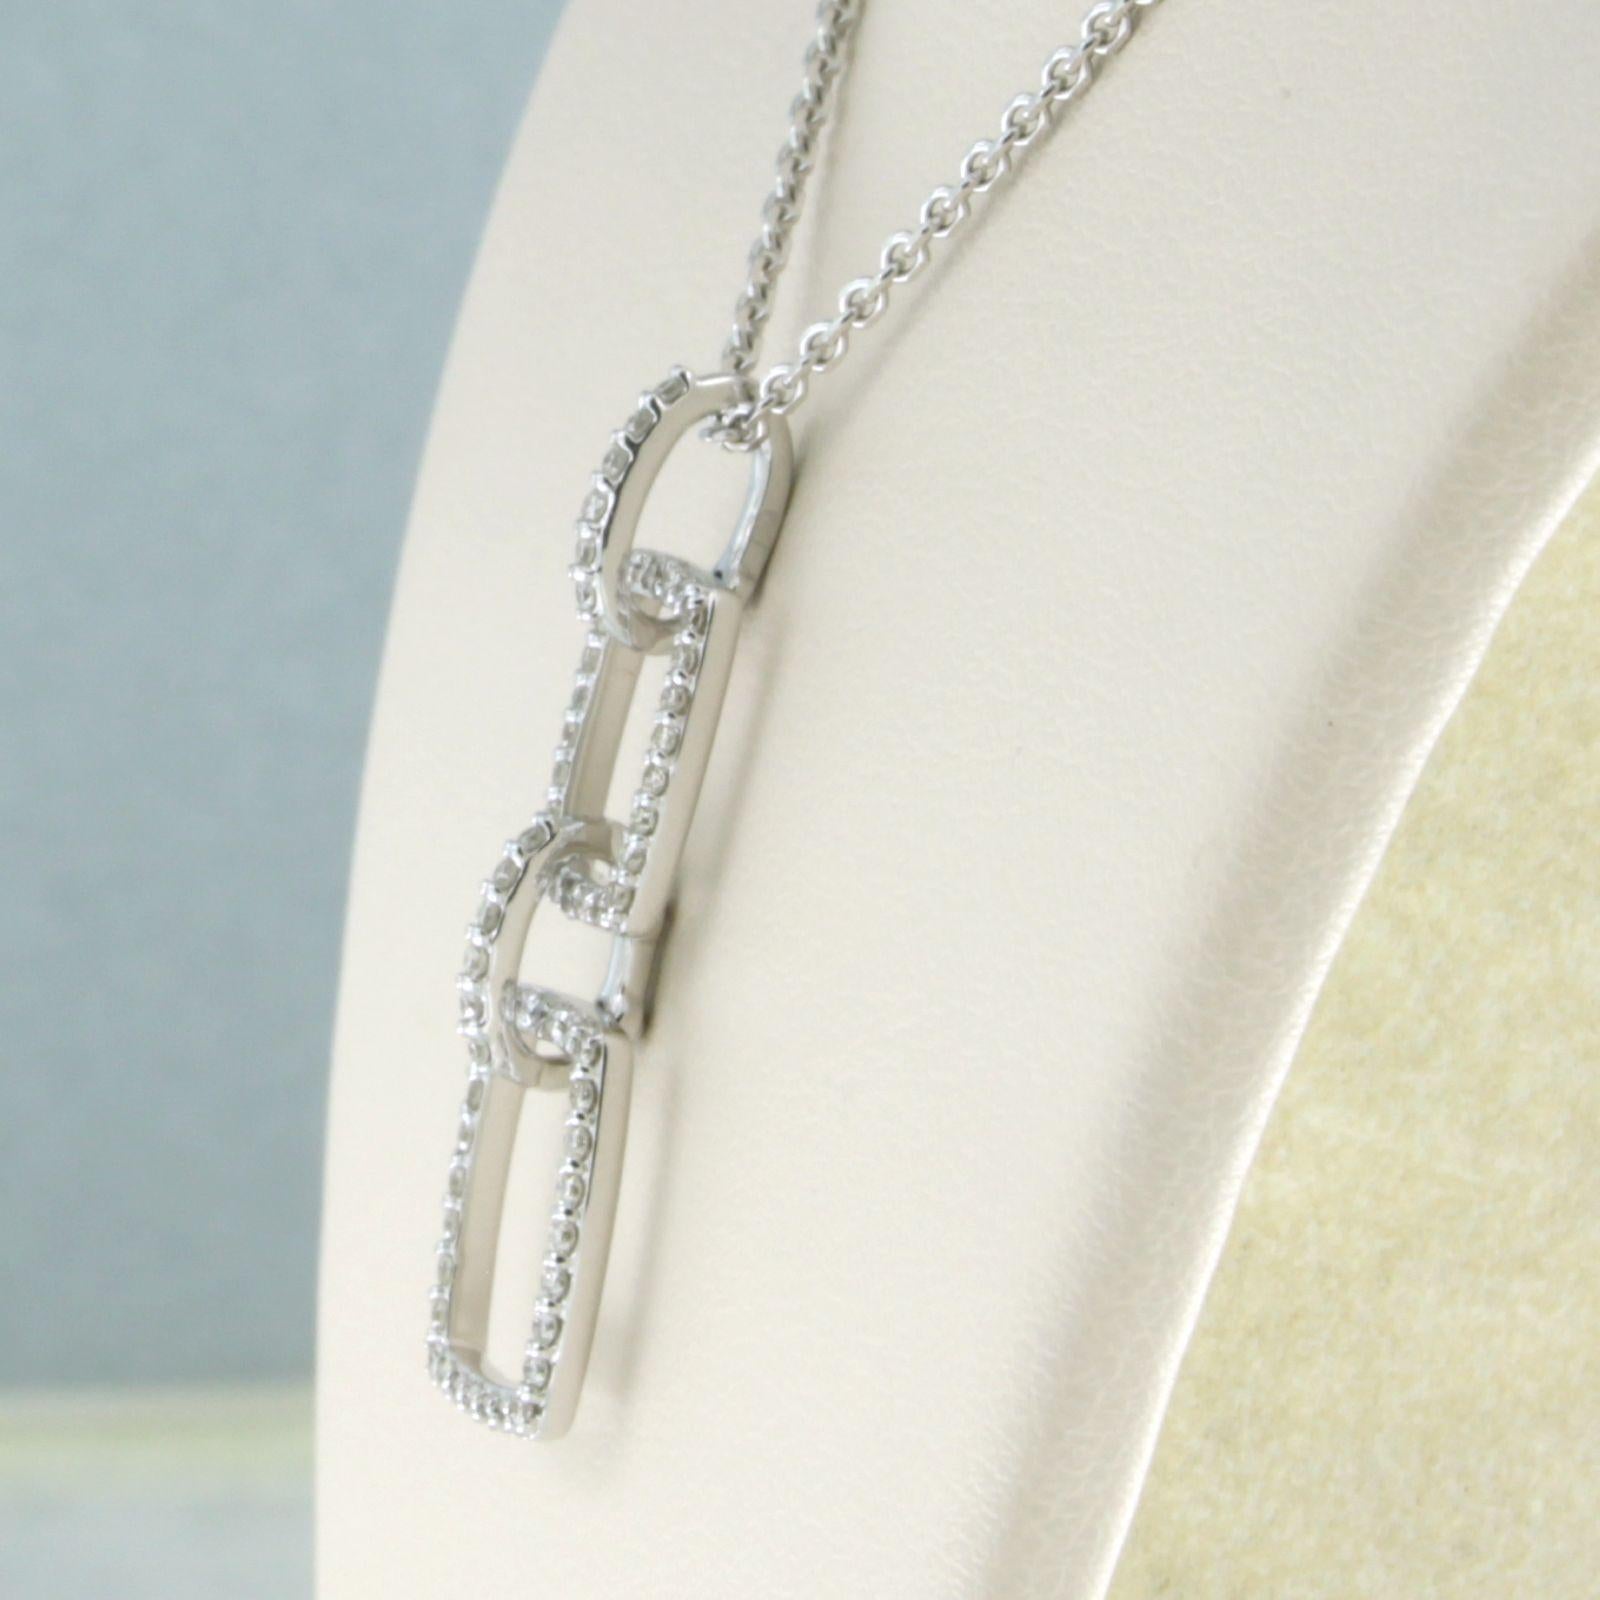 Women's Necklace and pendant set with diamonds 18k white gold 40 cm long For Sale